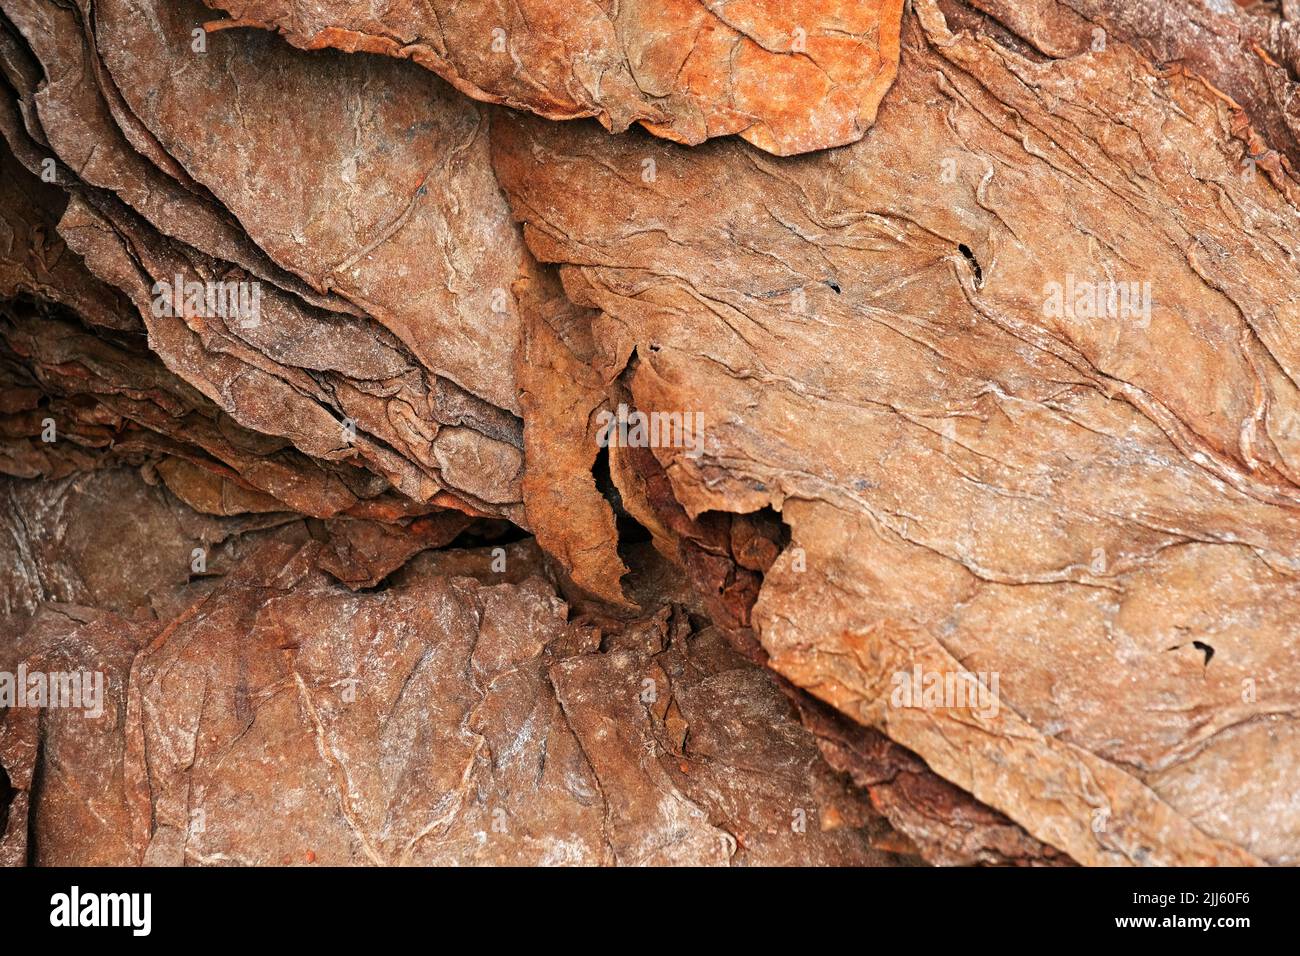 Dried tobacco leaves as background, close-up, High quality tobacco big leaf, secective focus. Stock Photo